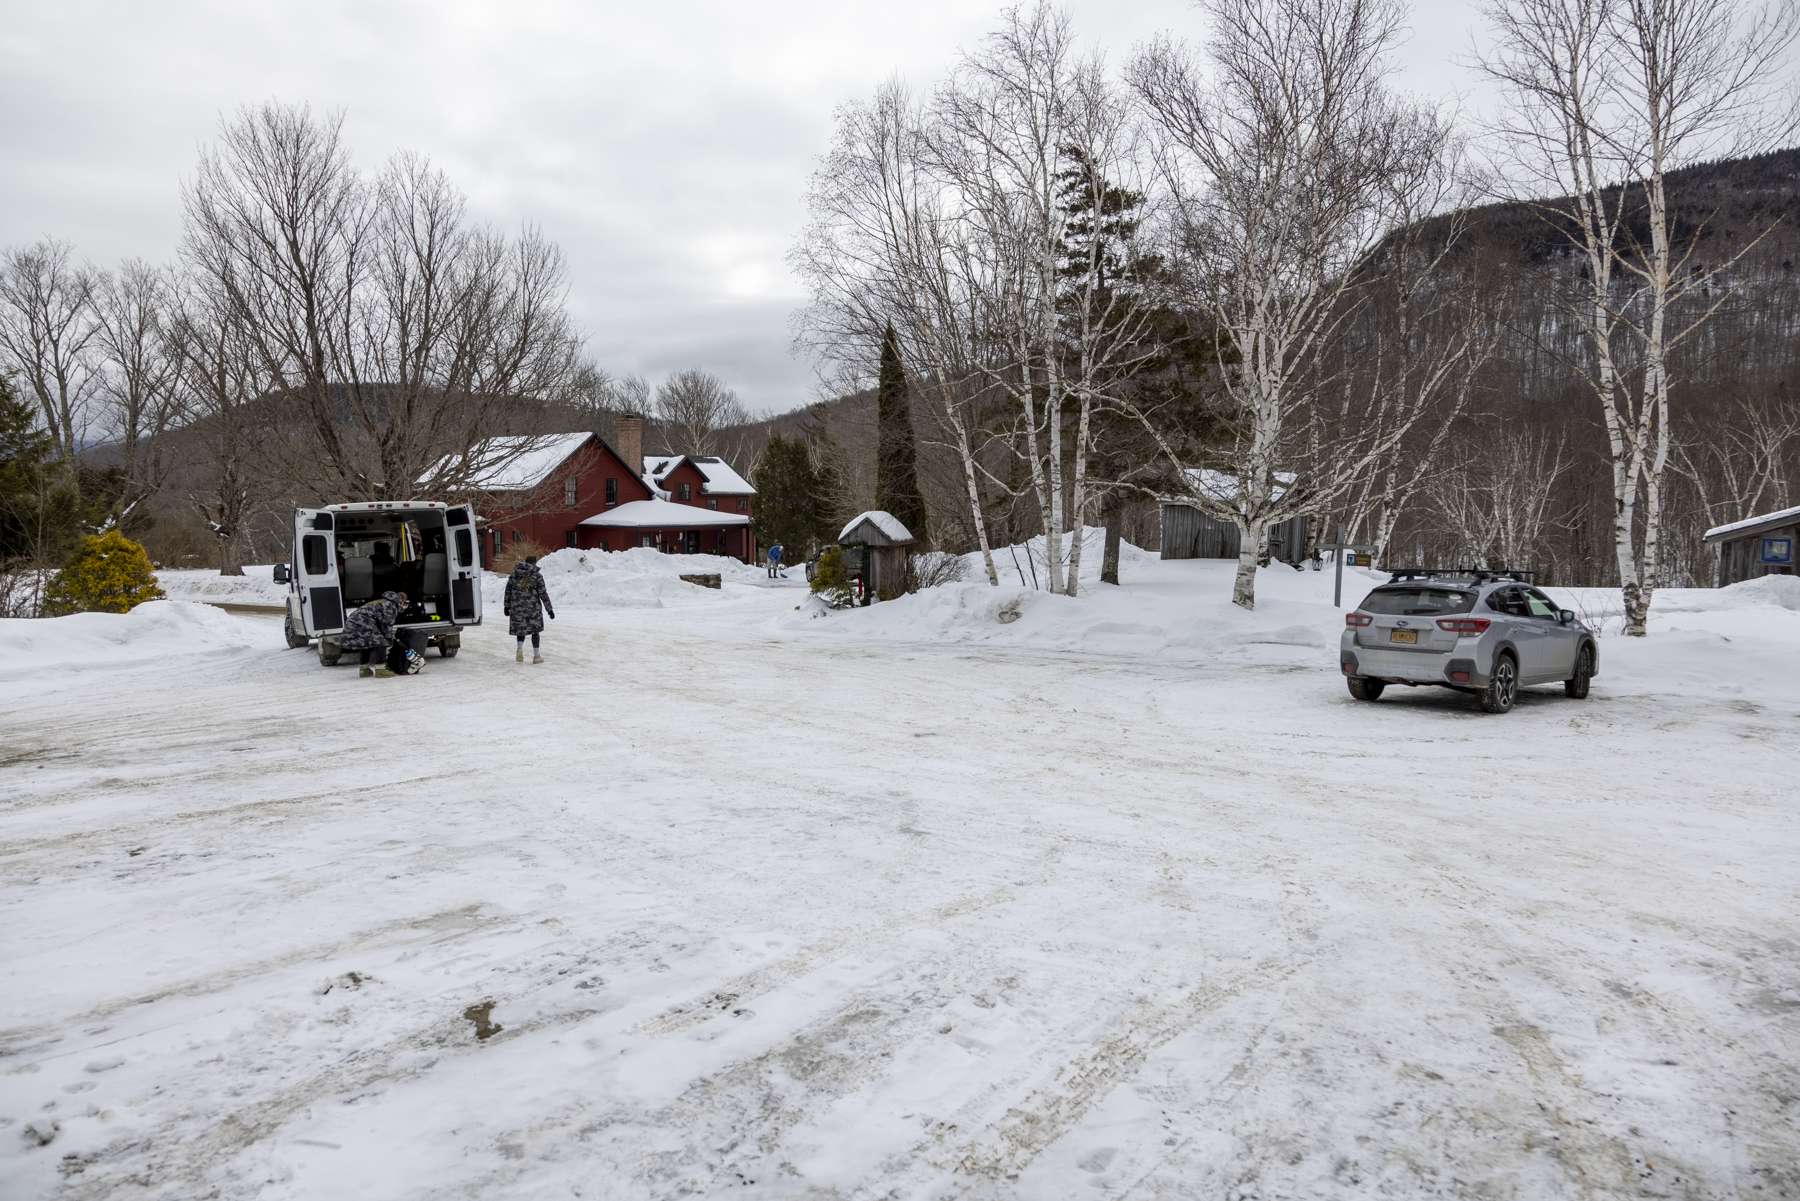 The parking lot at the end of Alstead Hill Road in Keene in the middle of the Adirondack Rock and River property. The lot is used by guests  of the lodge and guide service and backcountry users looking to access Old Mountain Road. Photo by Mike Lynch